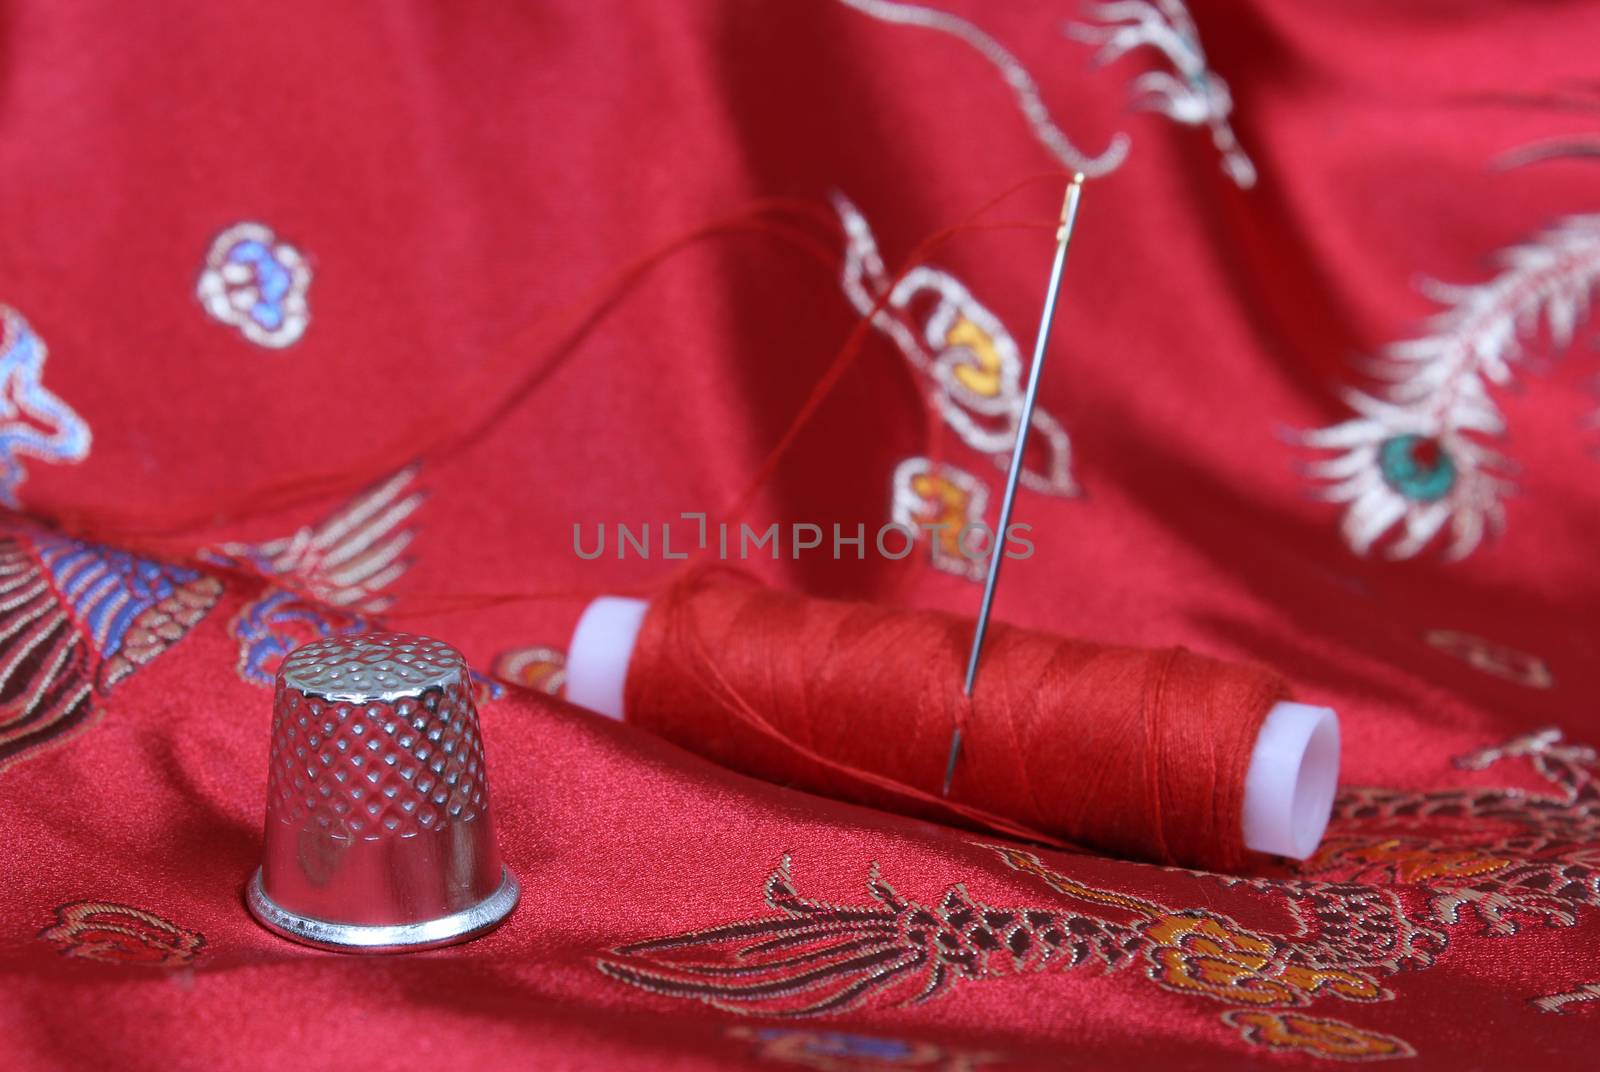 Thimble and Thread on Asian Red Silk Fabric by Marti157900